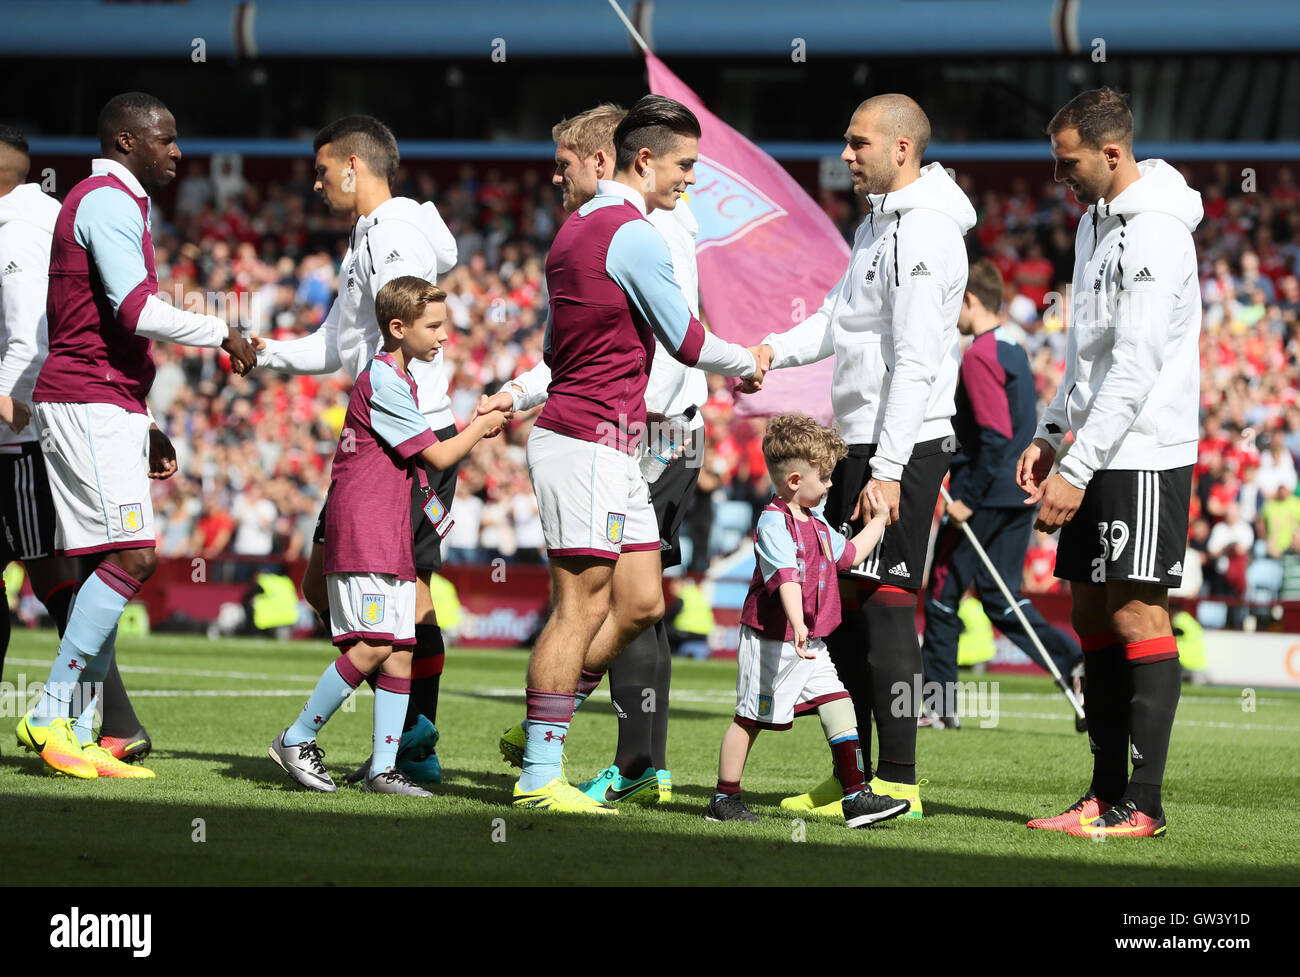 Aston Villa's Jack Grealish lines-up with mascot Carter Carrington during the Sky Bet Championship match at Villa Park, Birmingham. PRESS ASSOCIATION Photo. Picture date: Sunday September 11, 2016. See PA story SOCCER Villa. Photo credit should read: Martin Rickett/PA Wire. RESTRICTIONS: Editorial use only. Maximum 45 images during a match. No video emulation or promotion as 'live'. No use in games, competitions, merchandise, betting or single club/player services. No use with unofficial audio, video, data, fixtures or club/league logos. Stock Photo